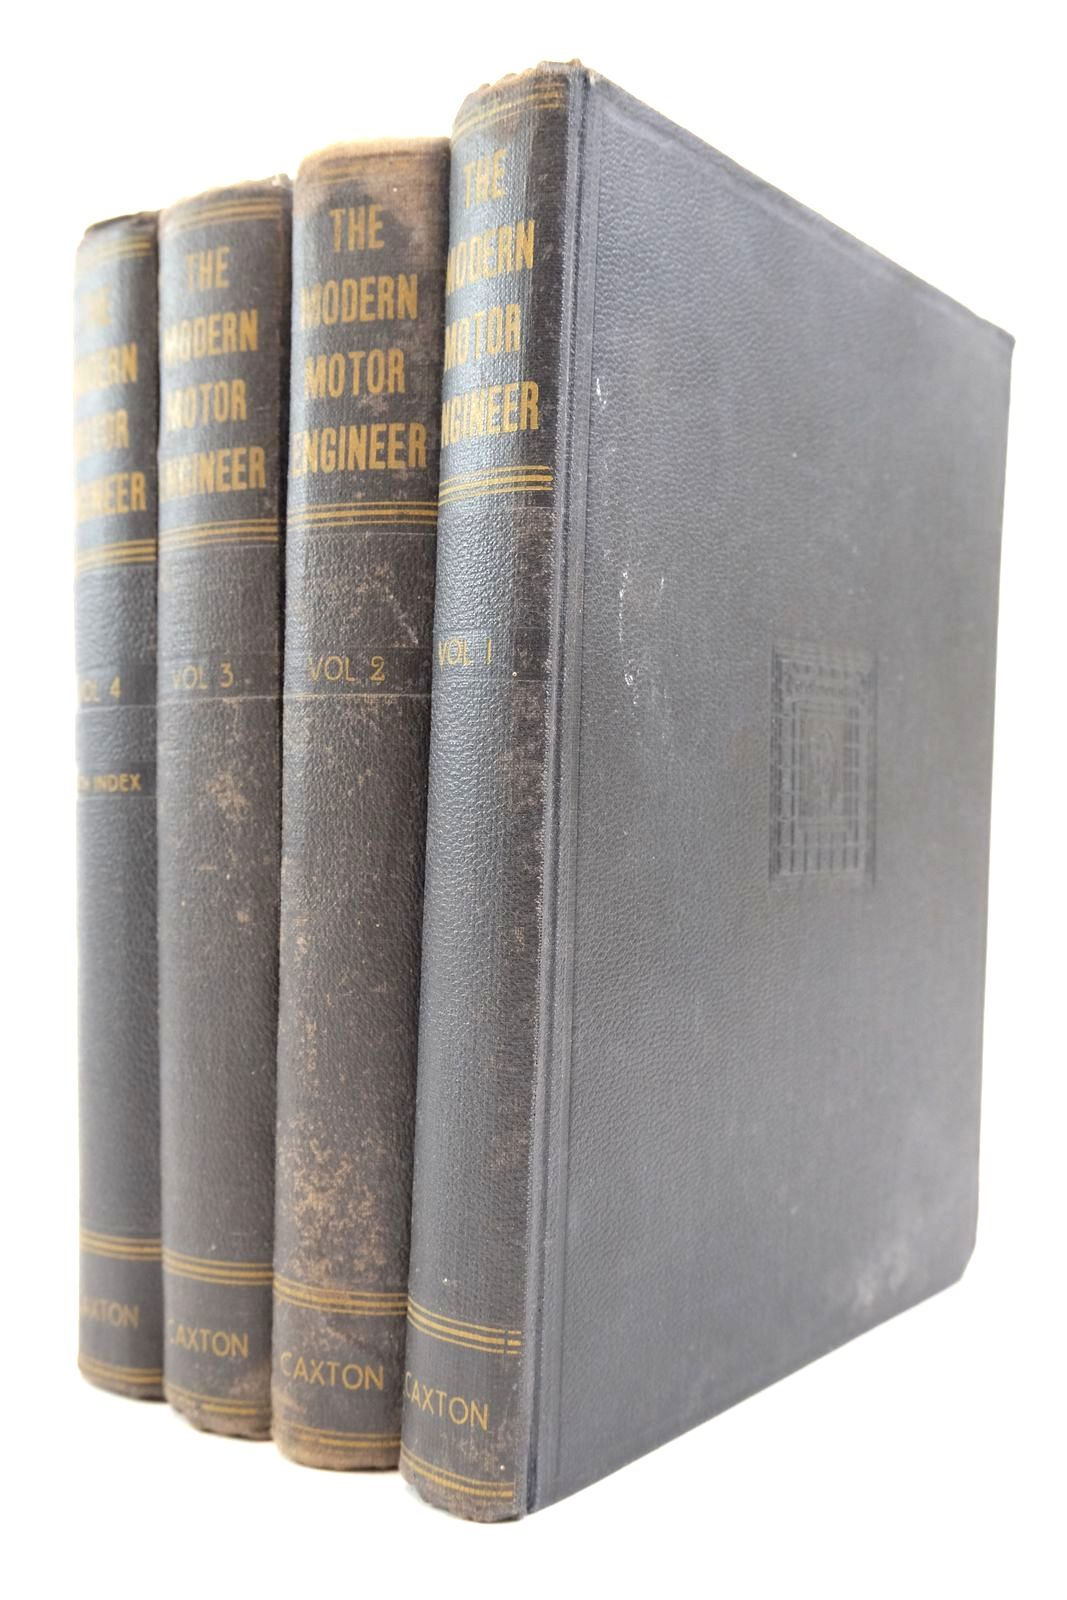 Photo of THE MODERN MOTOR ENGINEER (4 VOLUMES) written by Judge, Arthur W. published by The Caxton Publishing Company Ltd. (STOCK CODE: 2140396)  for sale by Stella & Rose's Books